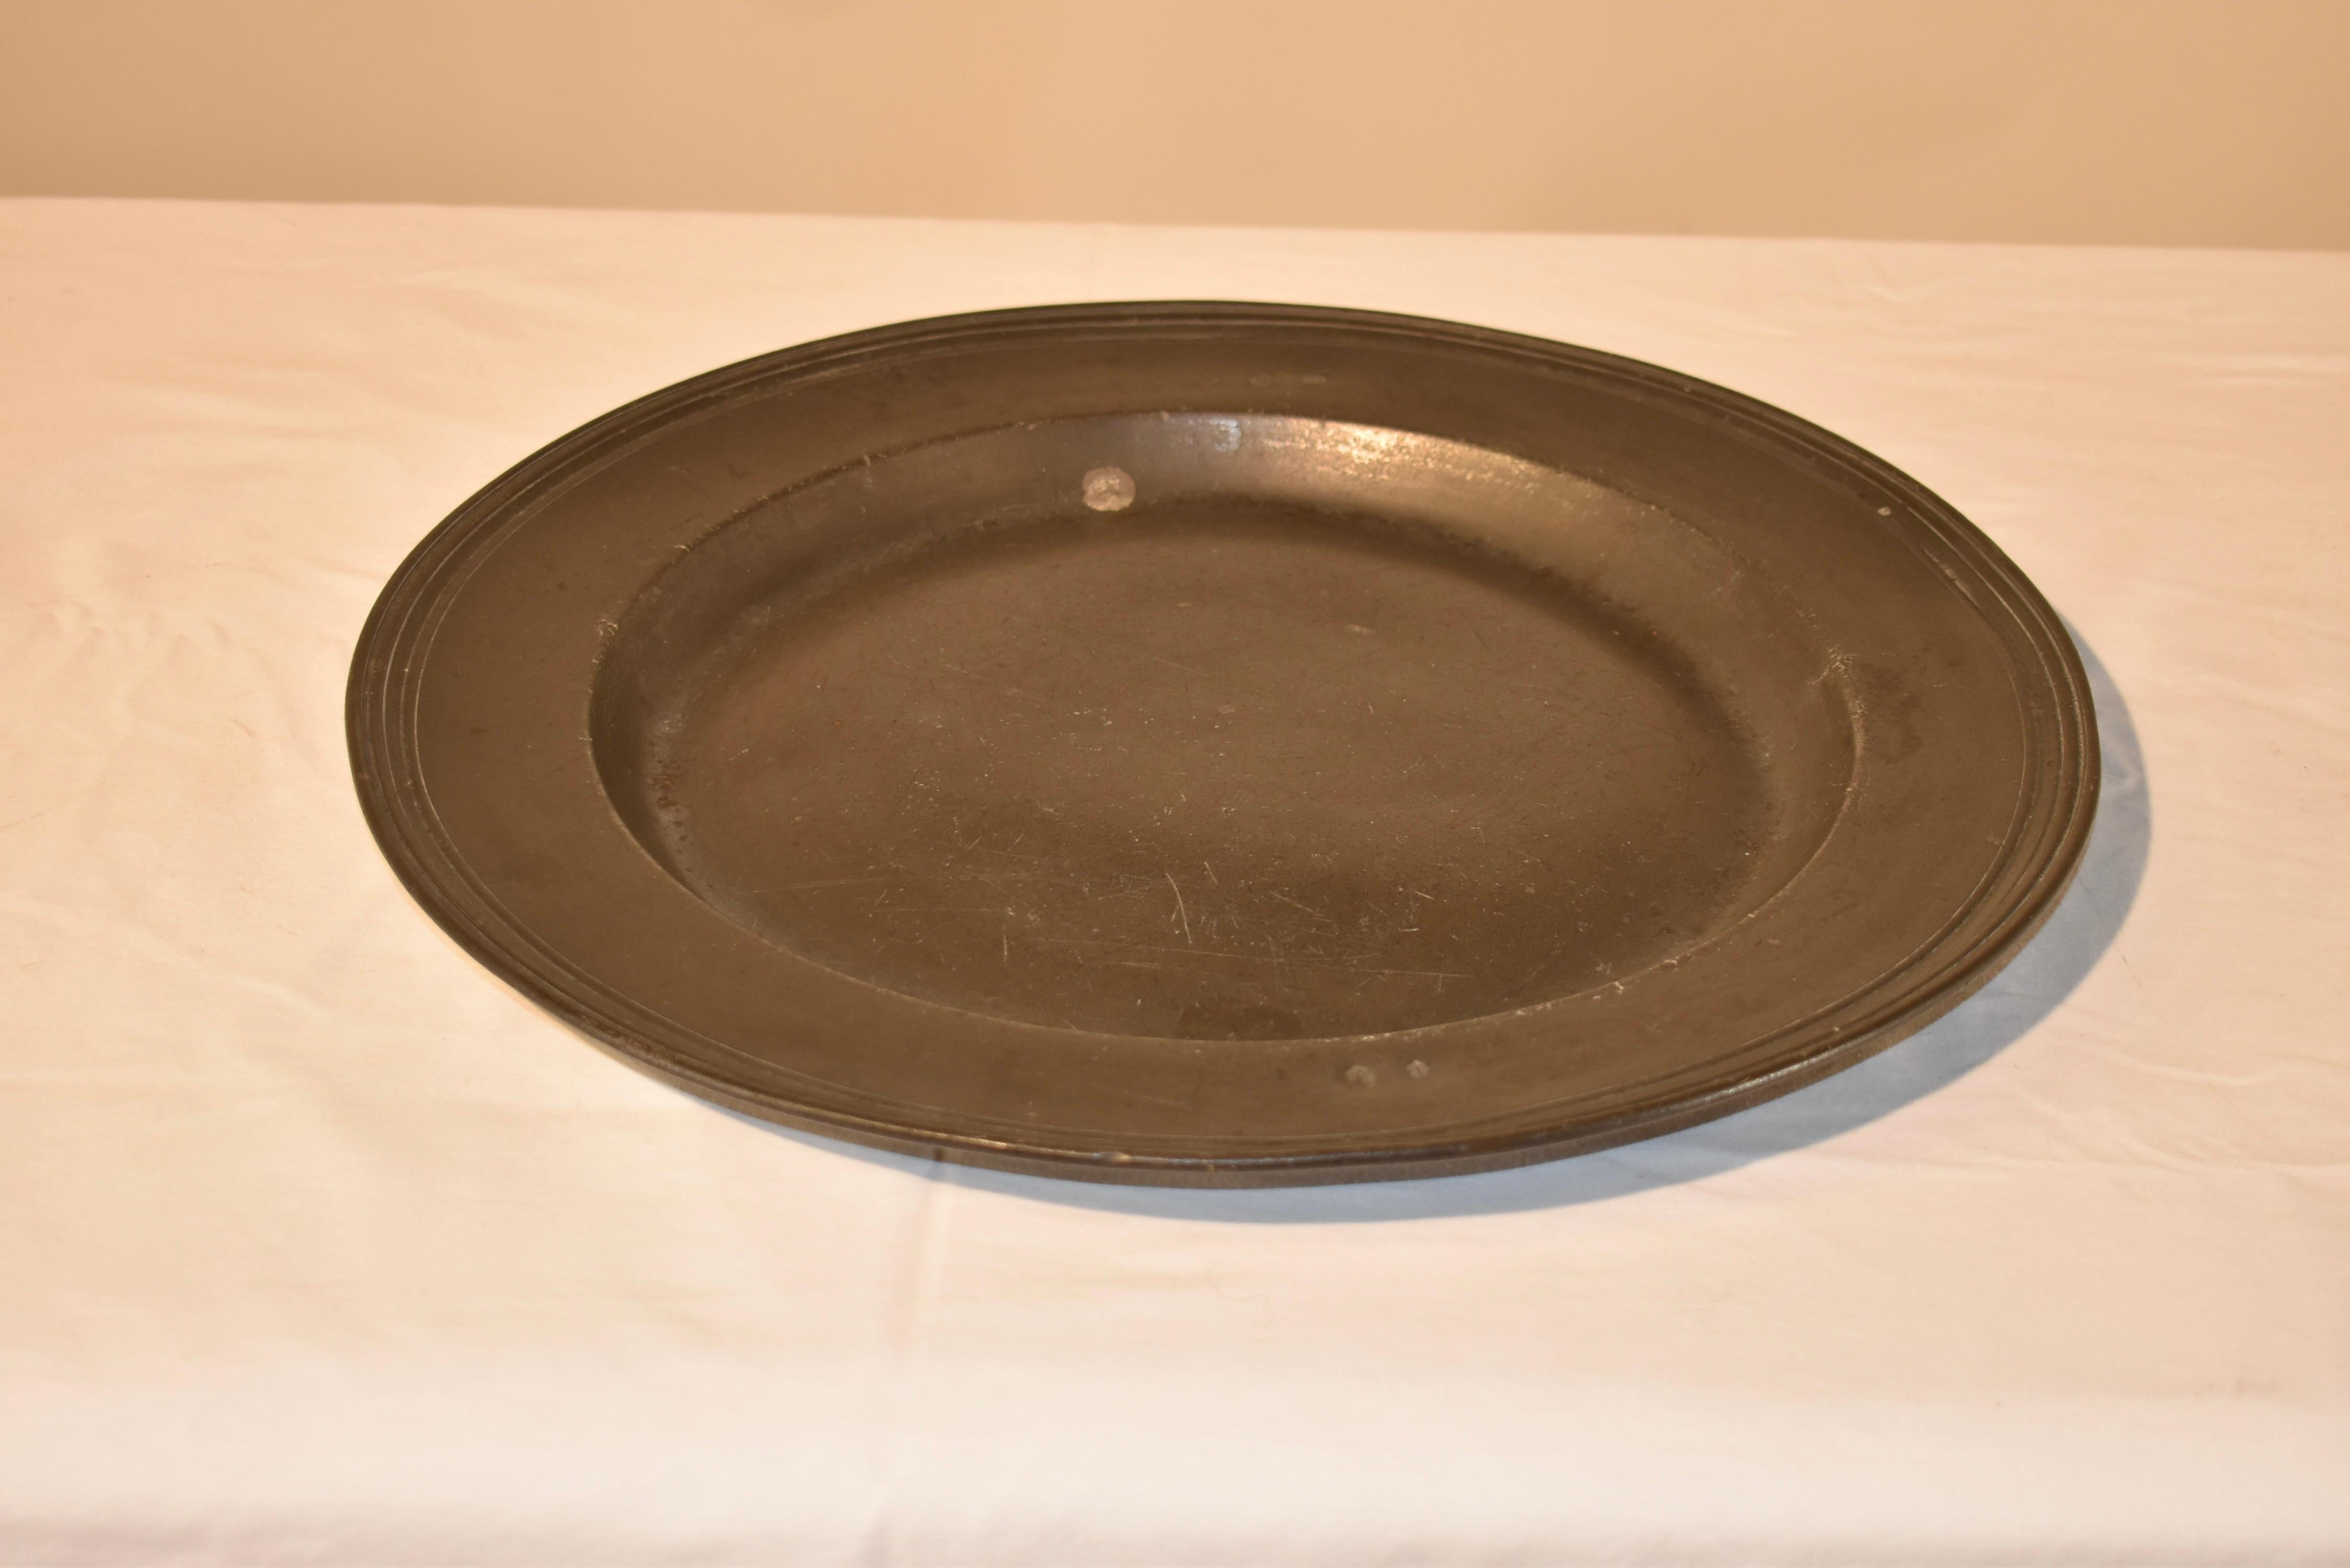 18th century large pewter charger with wide rim and molded edge, which is very elegant, especially for pewter, which was used more frequently for casual dining.  there are two hallmarks on the rim, both of which are photographed.  Plate stand not